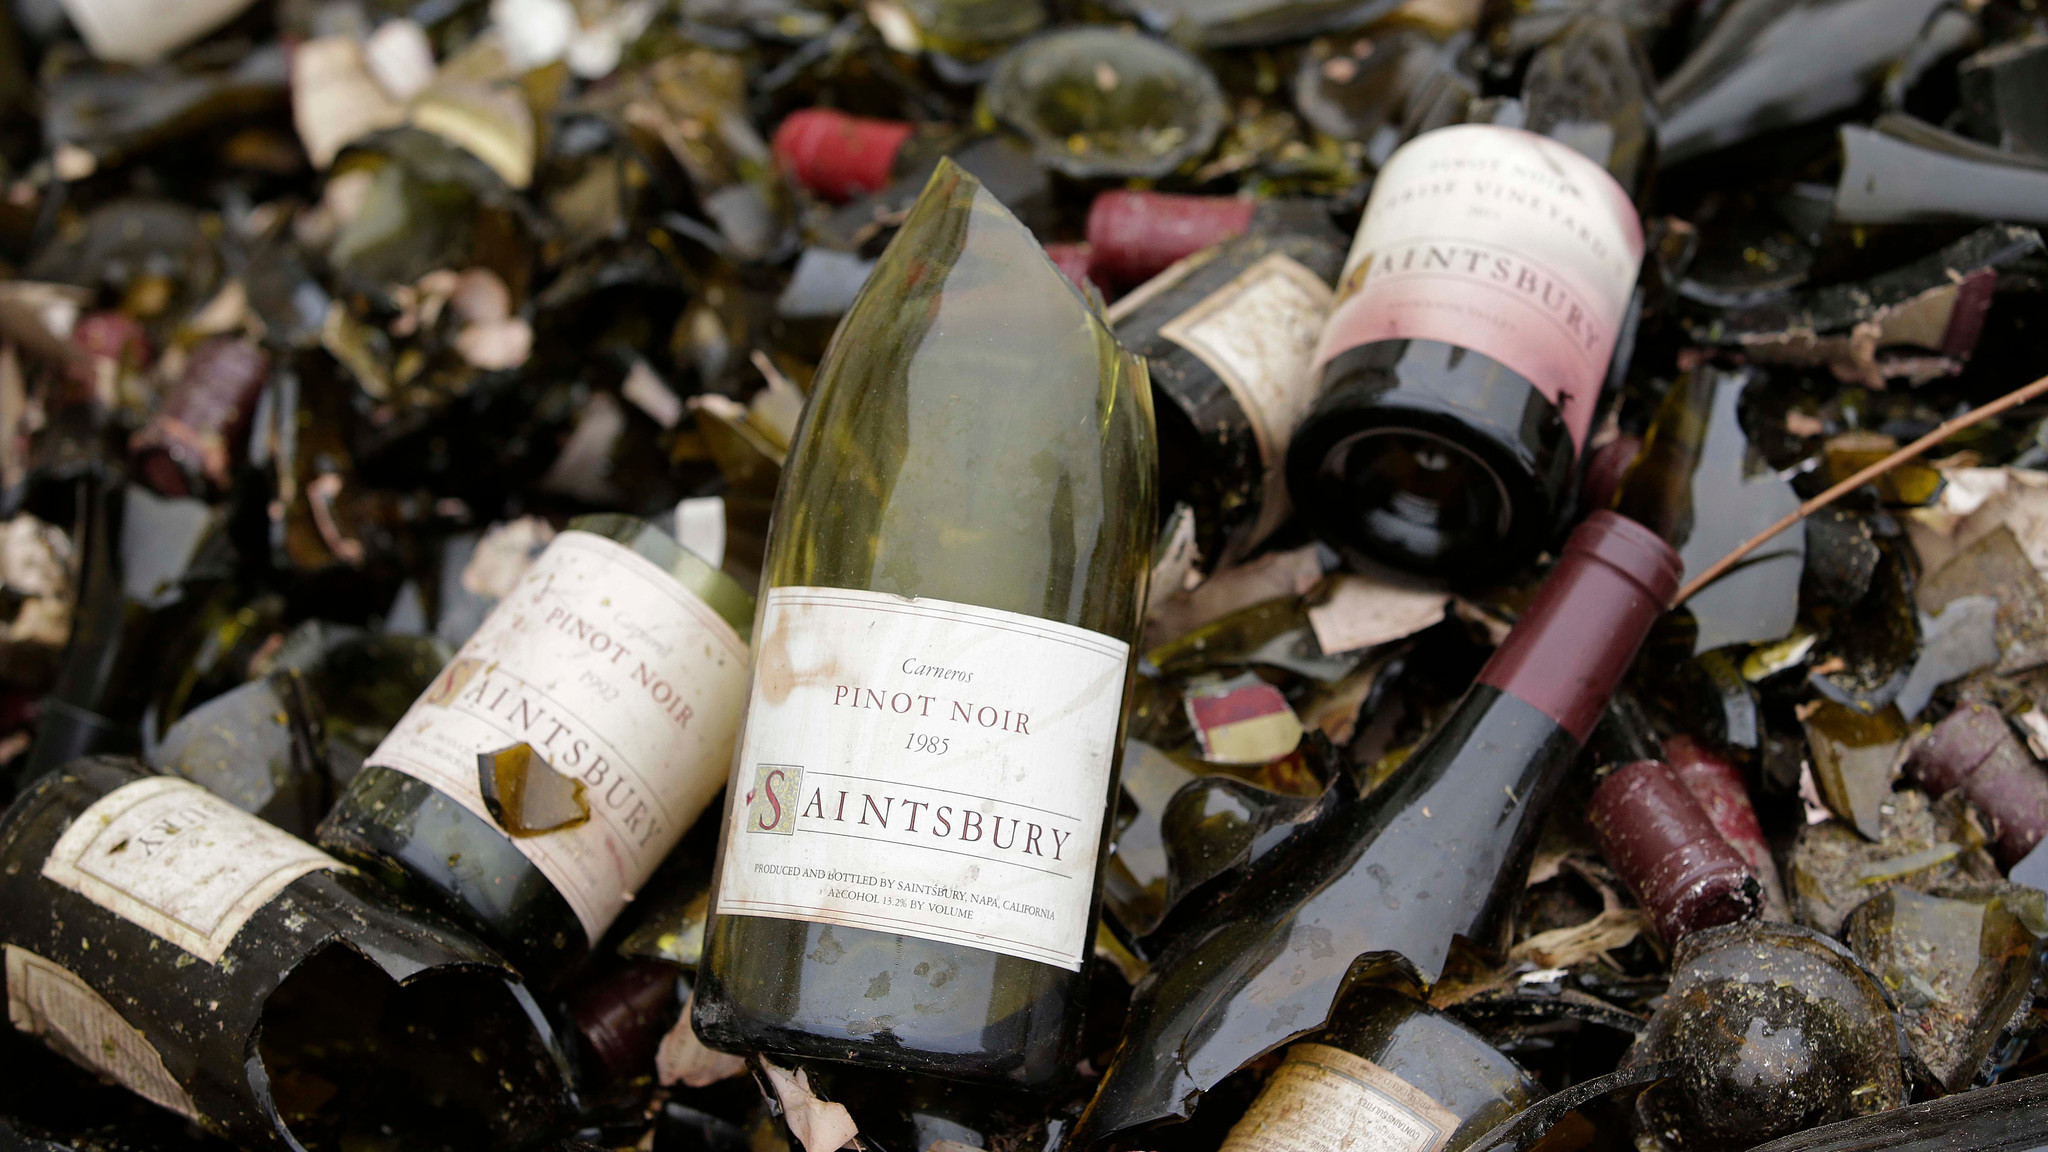 Vintage bottles from the wine library at Saintsbury winery in Napa, Calif., are tossed in a bin after an August 2014 temblor.